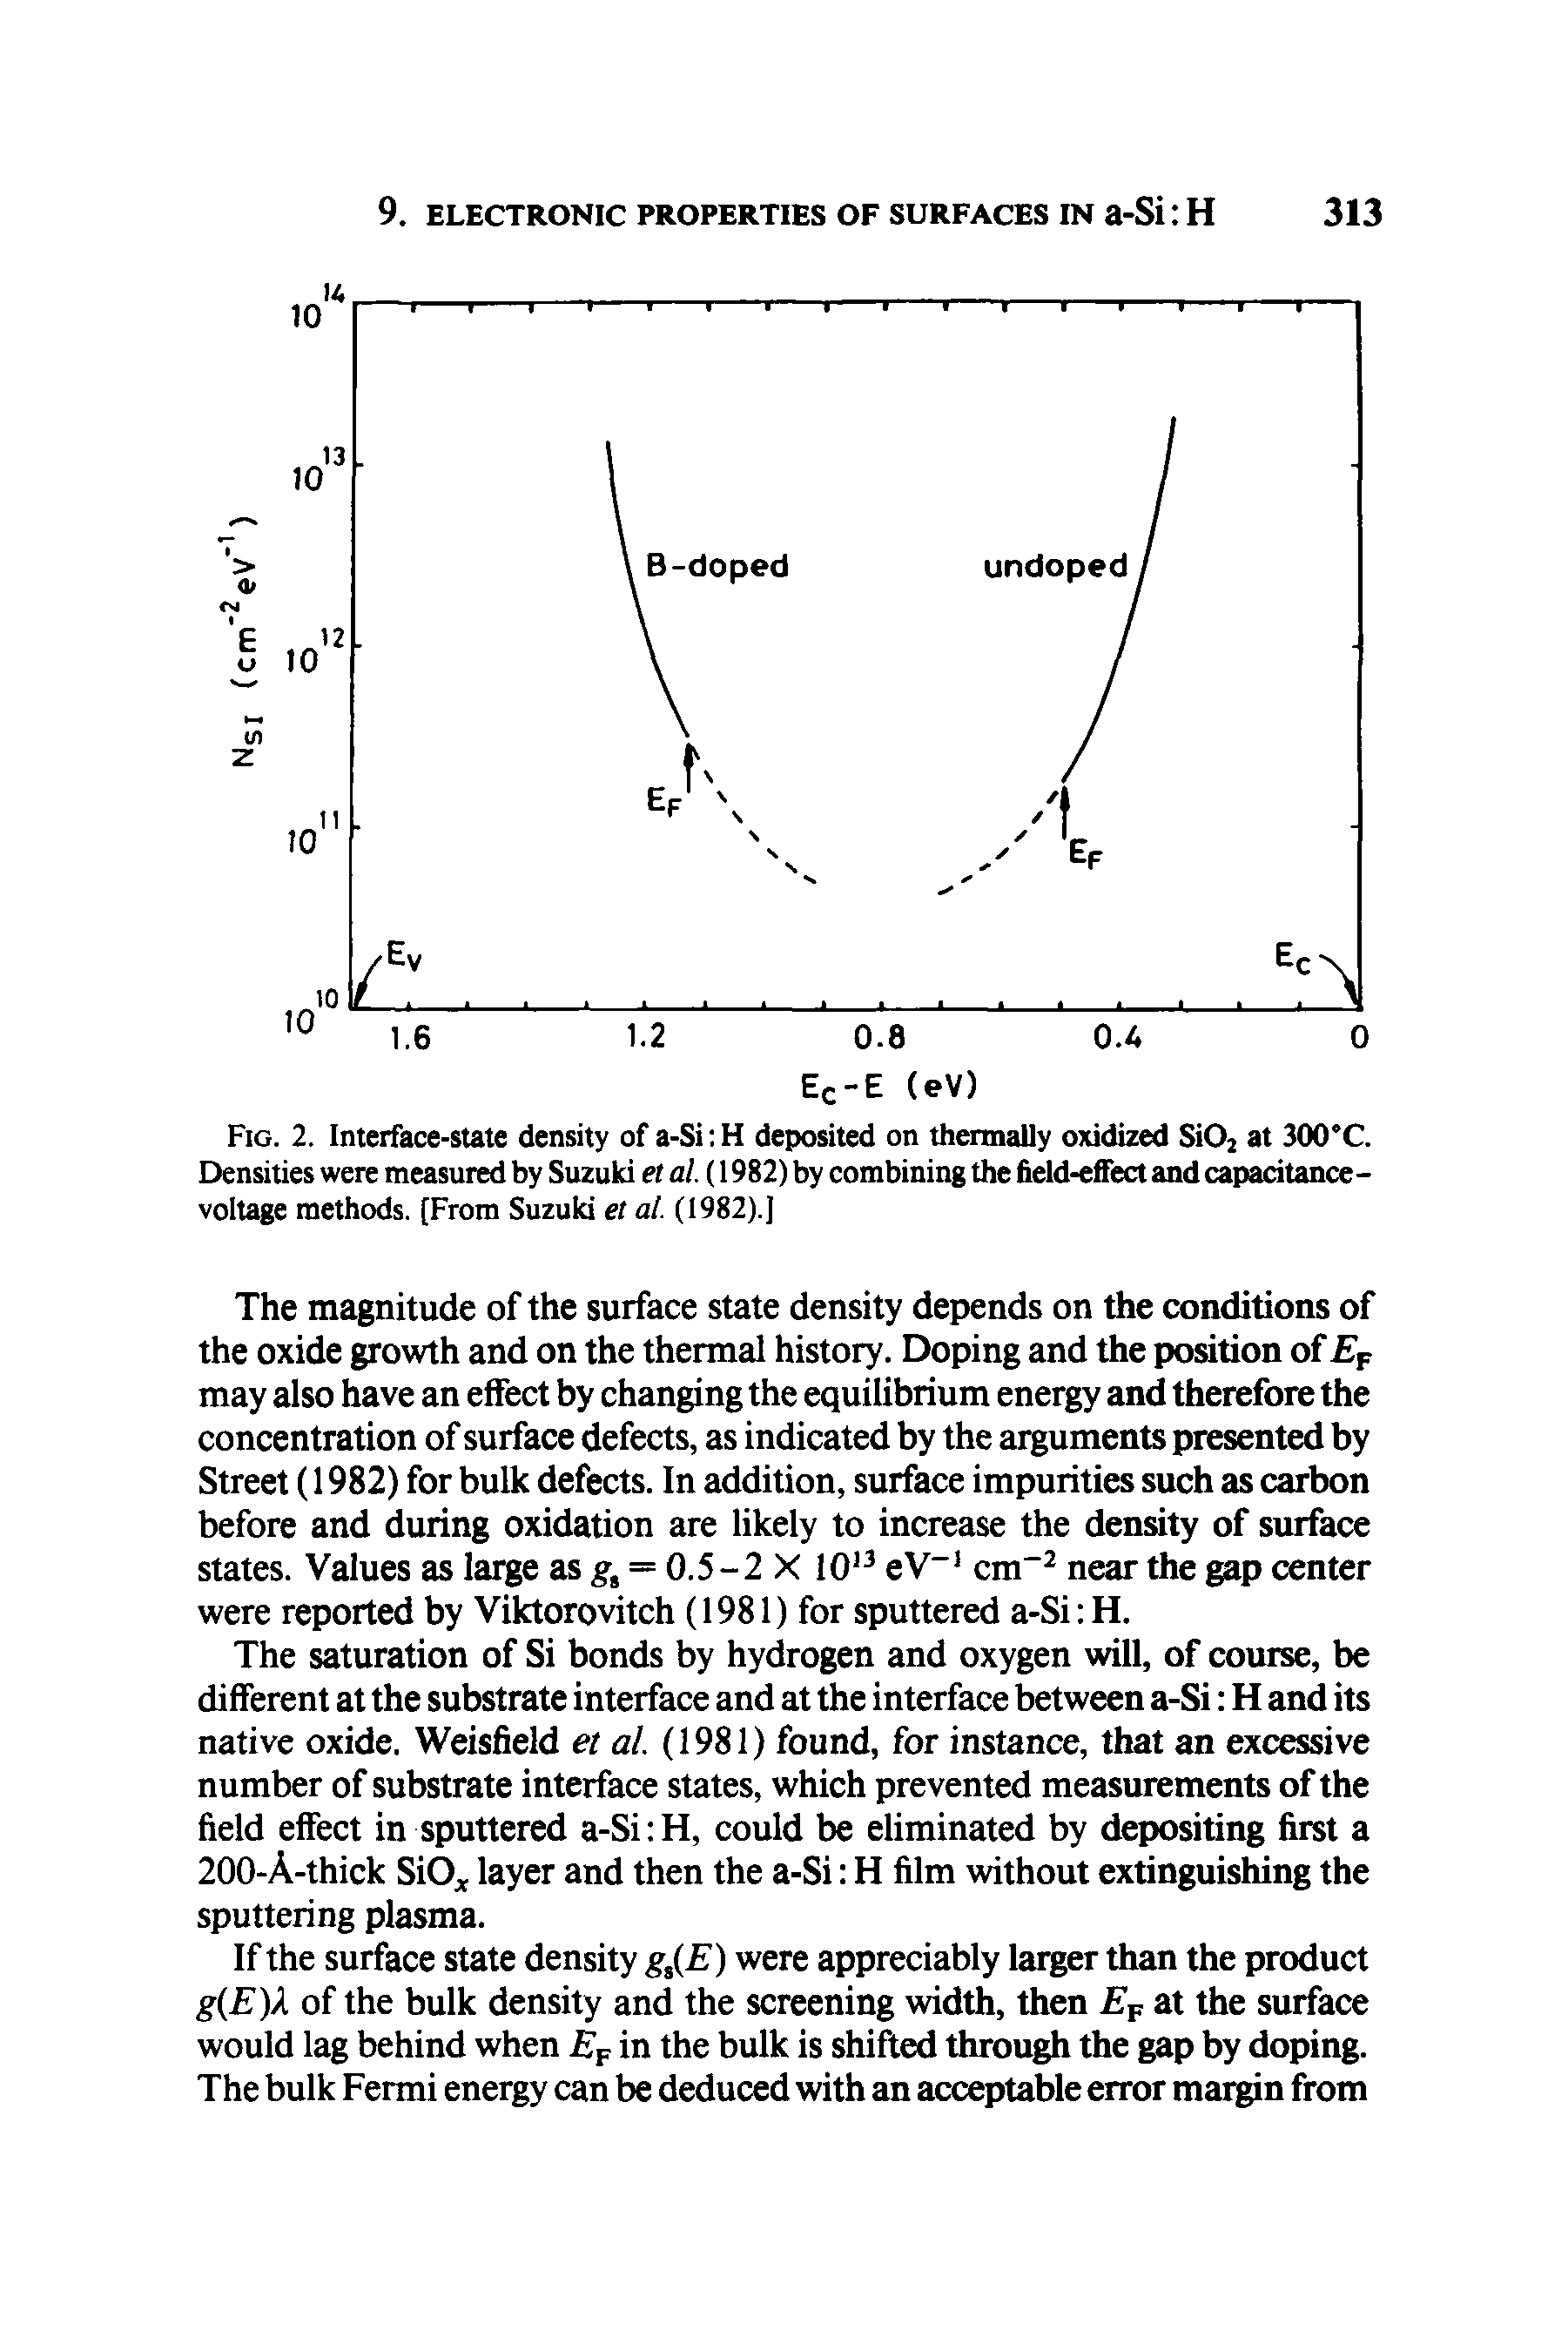 Fig. 2. Interface-state density of a-Si H deposited on thermally oxidized SiOj at 300°C. Densities were measured by Suzuki el al. (1982) by combining the field-eflFect and capacitance-voltage methods. [From Suzuki el al. (1982).]...